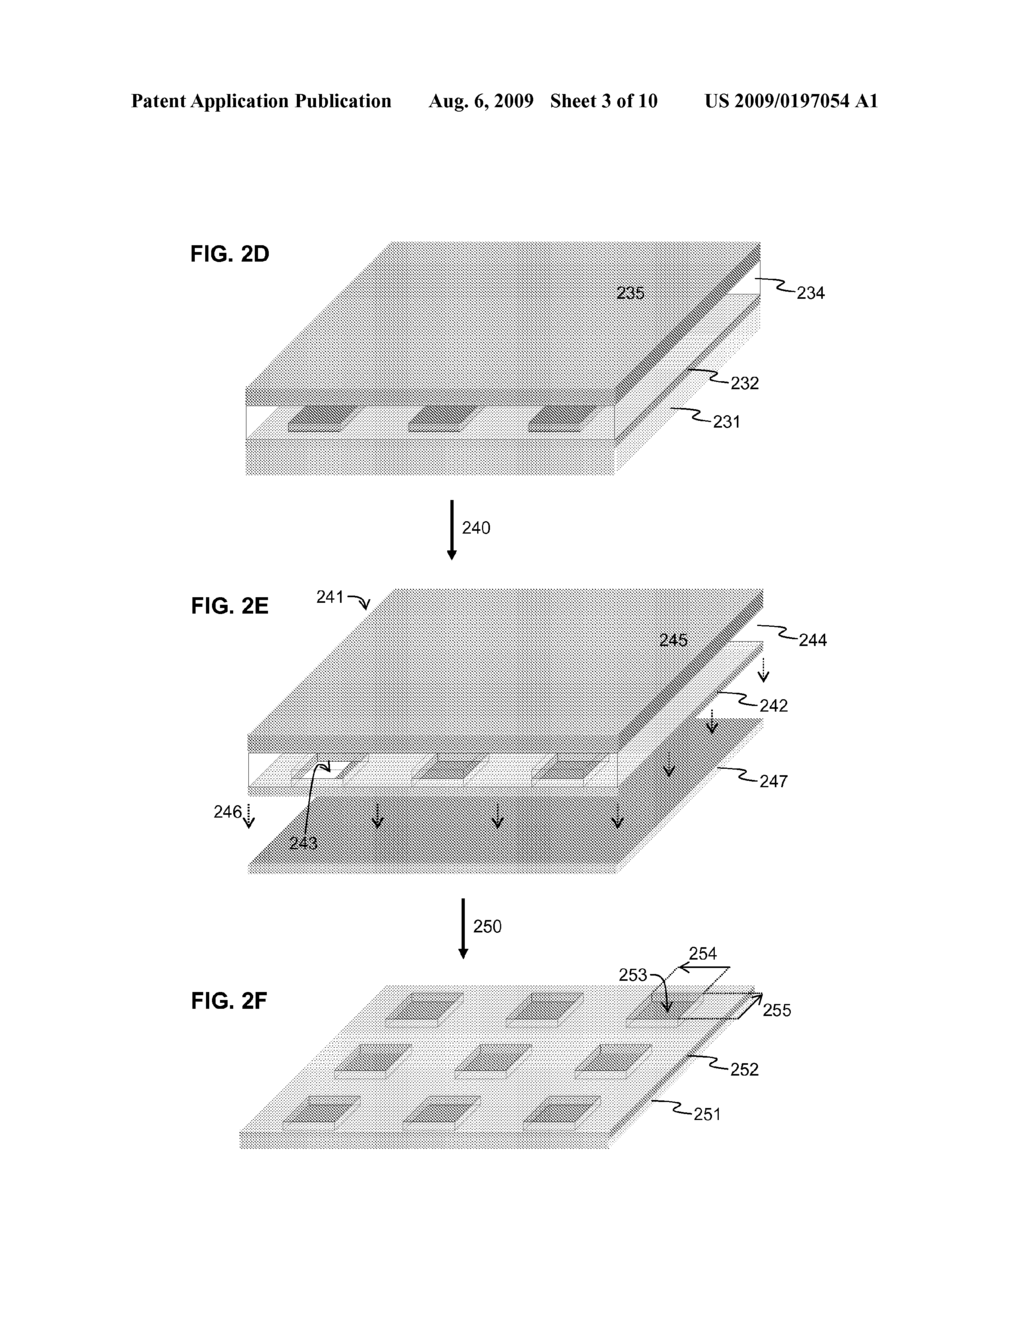 Stencils With Removable Backings for Forming Micron-Sized Features on Surfaces and Methods of Making and Using the Same - diagram, schematic, and image 04